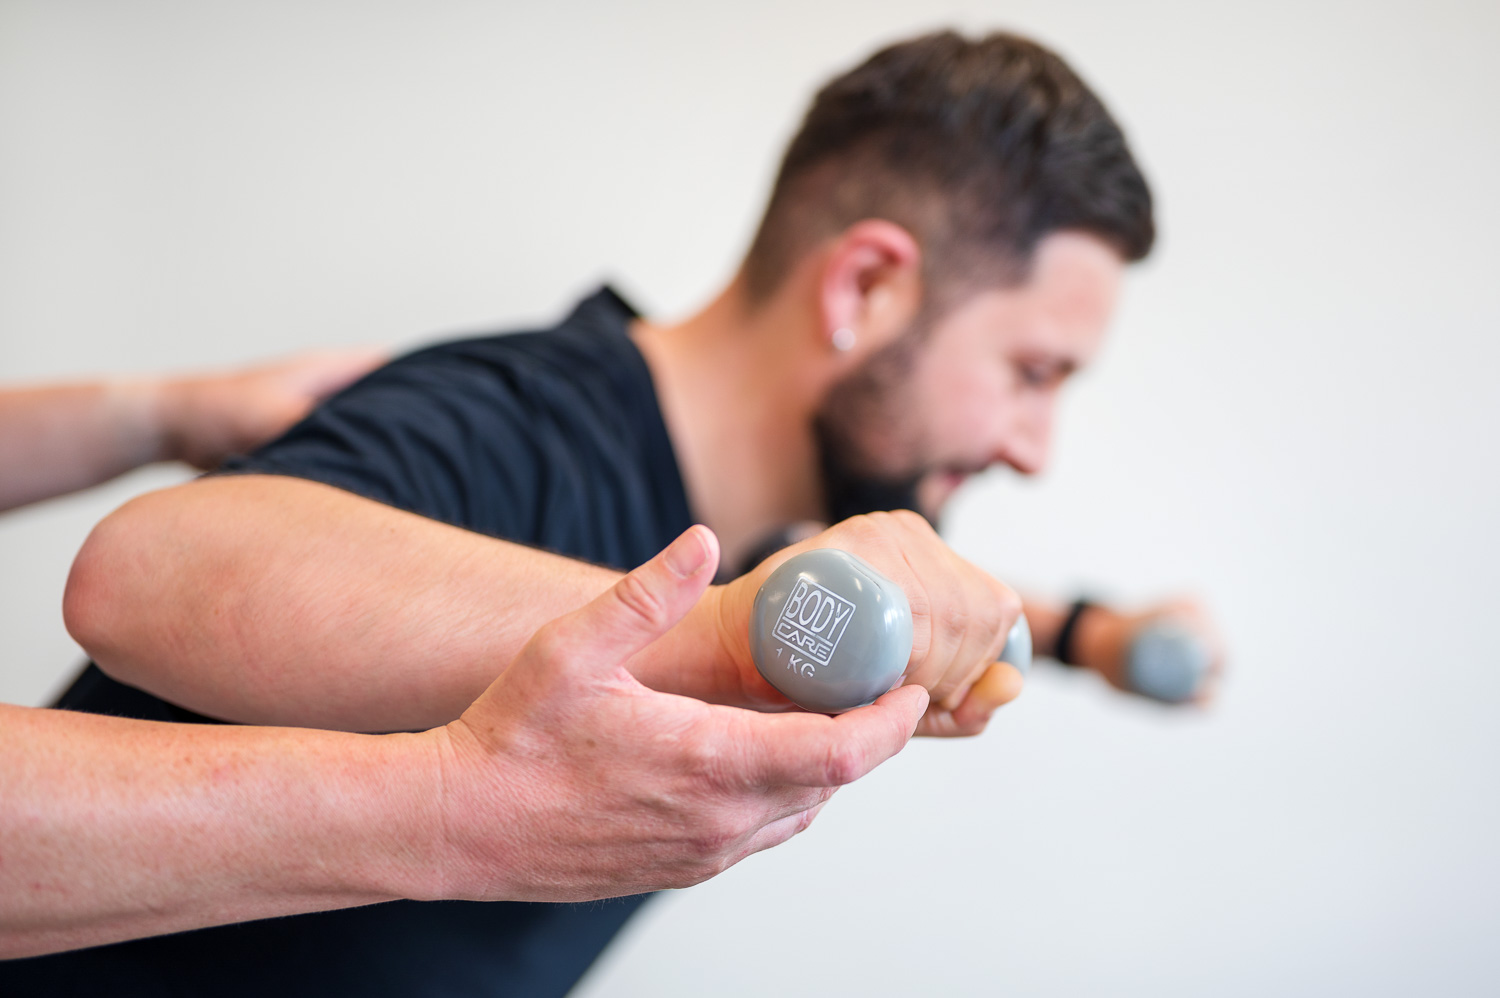 A patient trains his back stability with two small dumbbells.